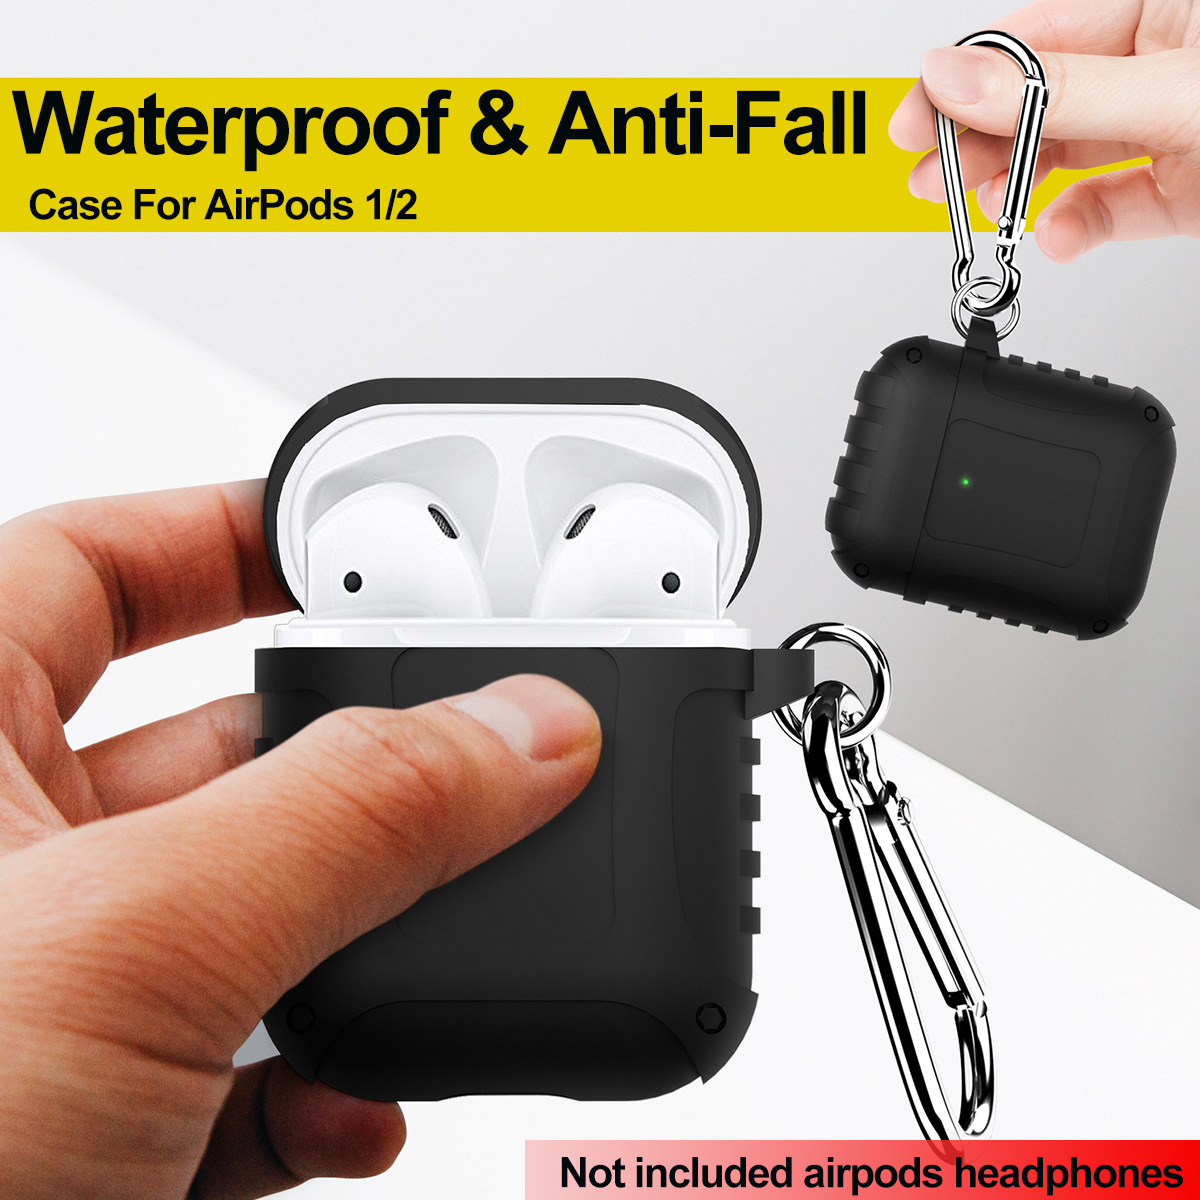 Pure-Armor-Design-Soft-Silicone-Shockproof-Earphone-Storage-Case-Cover-with-Keychain-for-Apple-Airpo-1790438-2